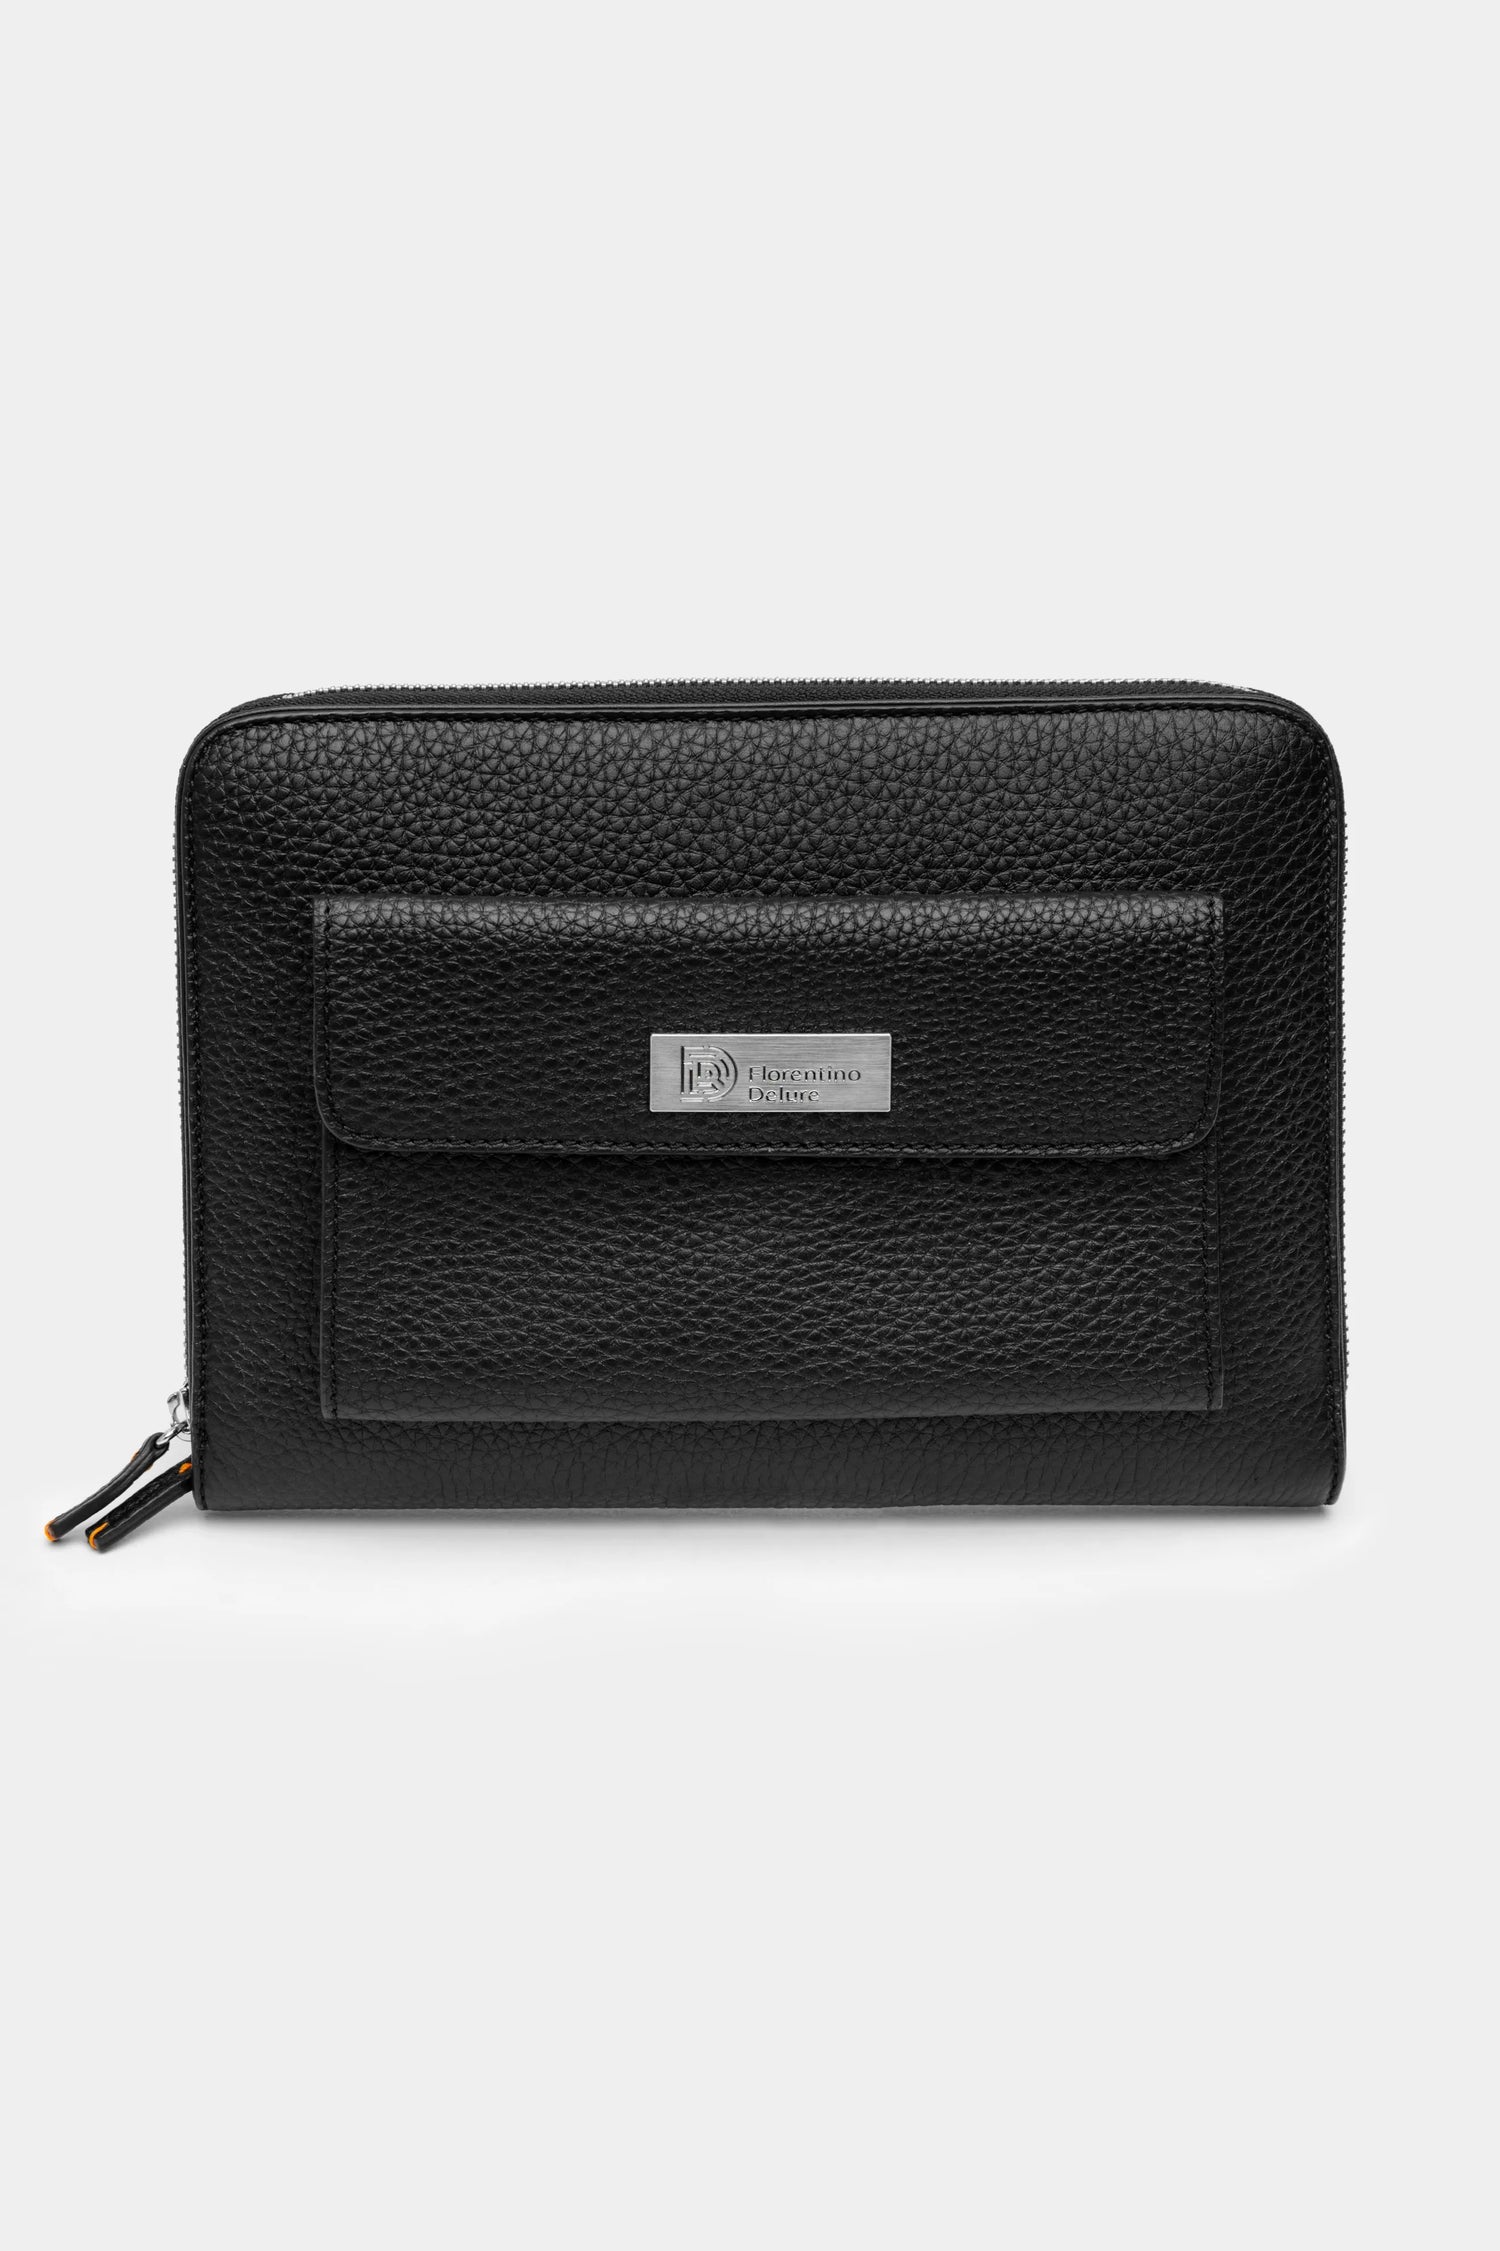 Black Leather Wallet with front pocket